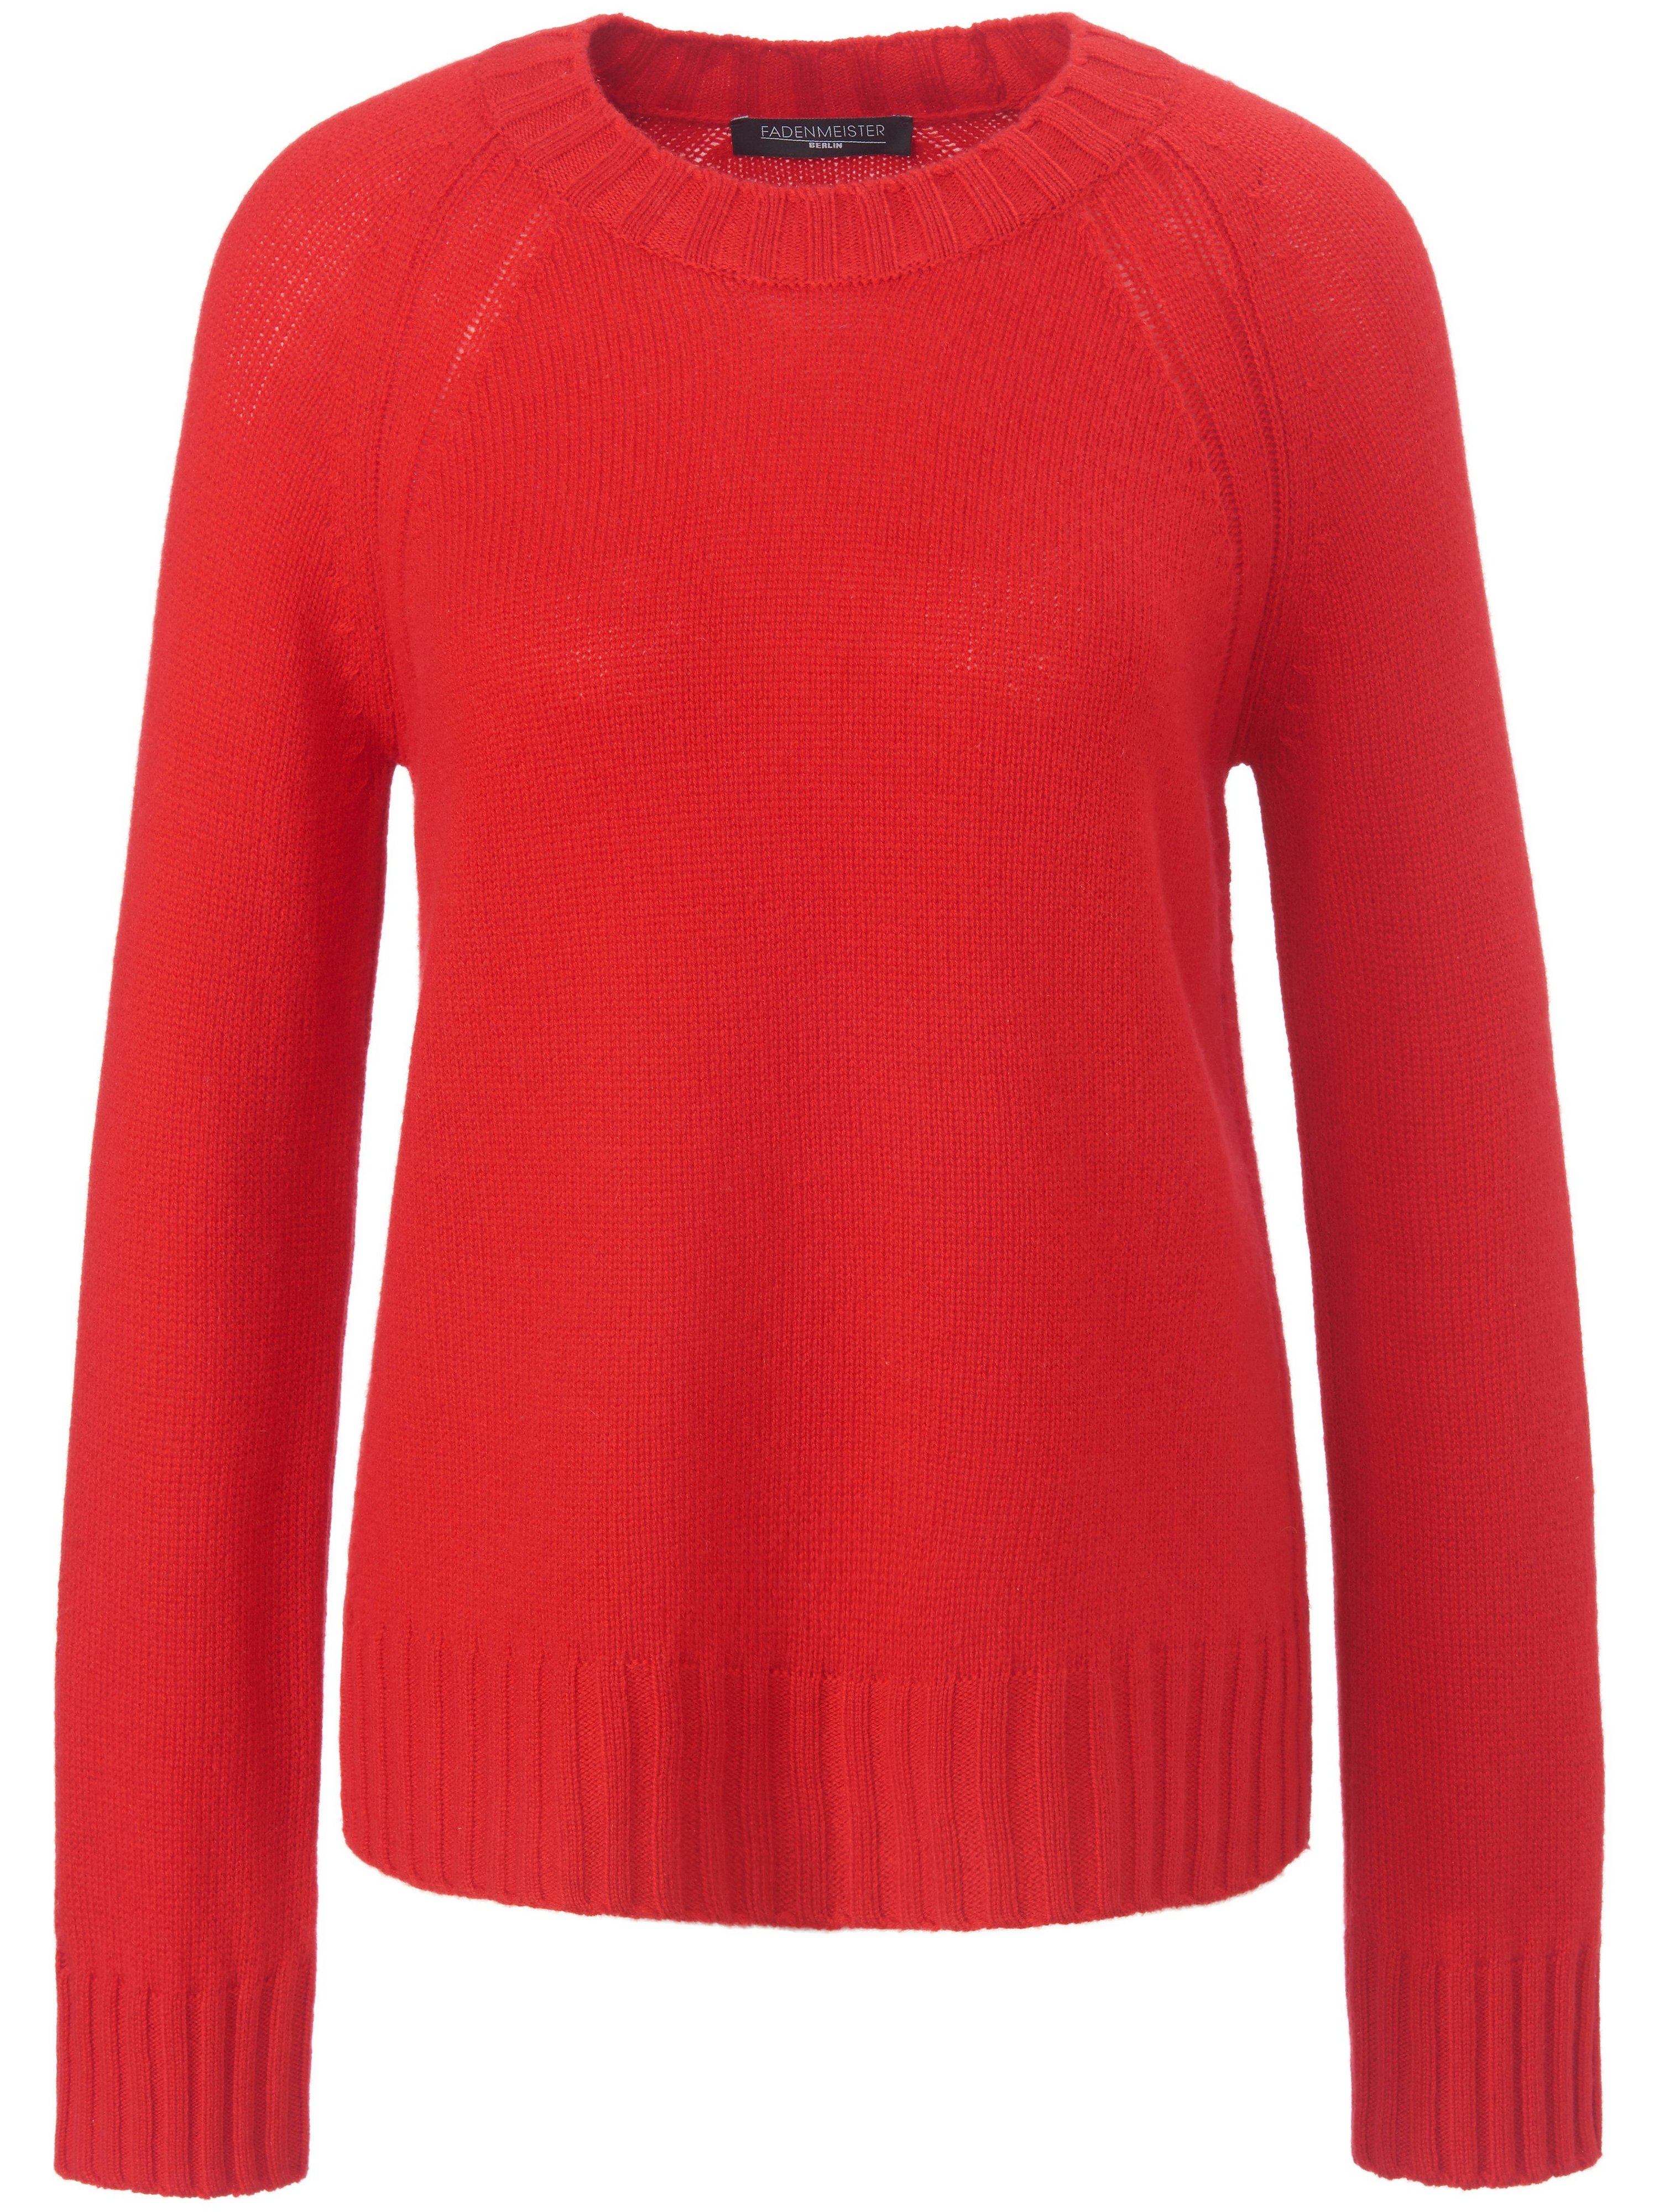 Le pull encolure ronde  Fadenmeister Berlin rouge taille 44